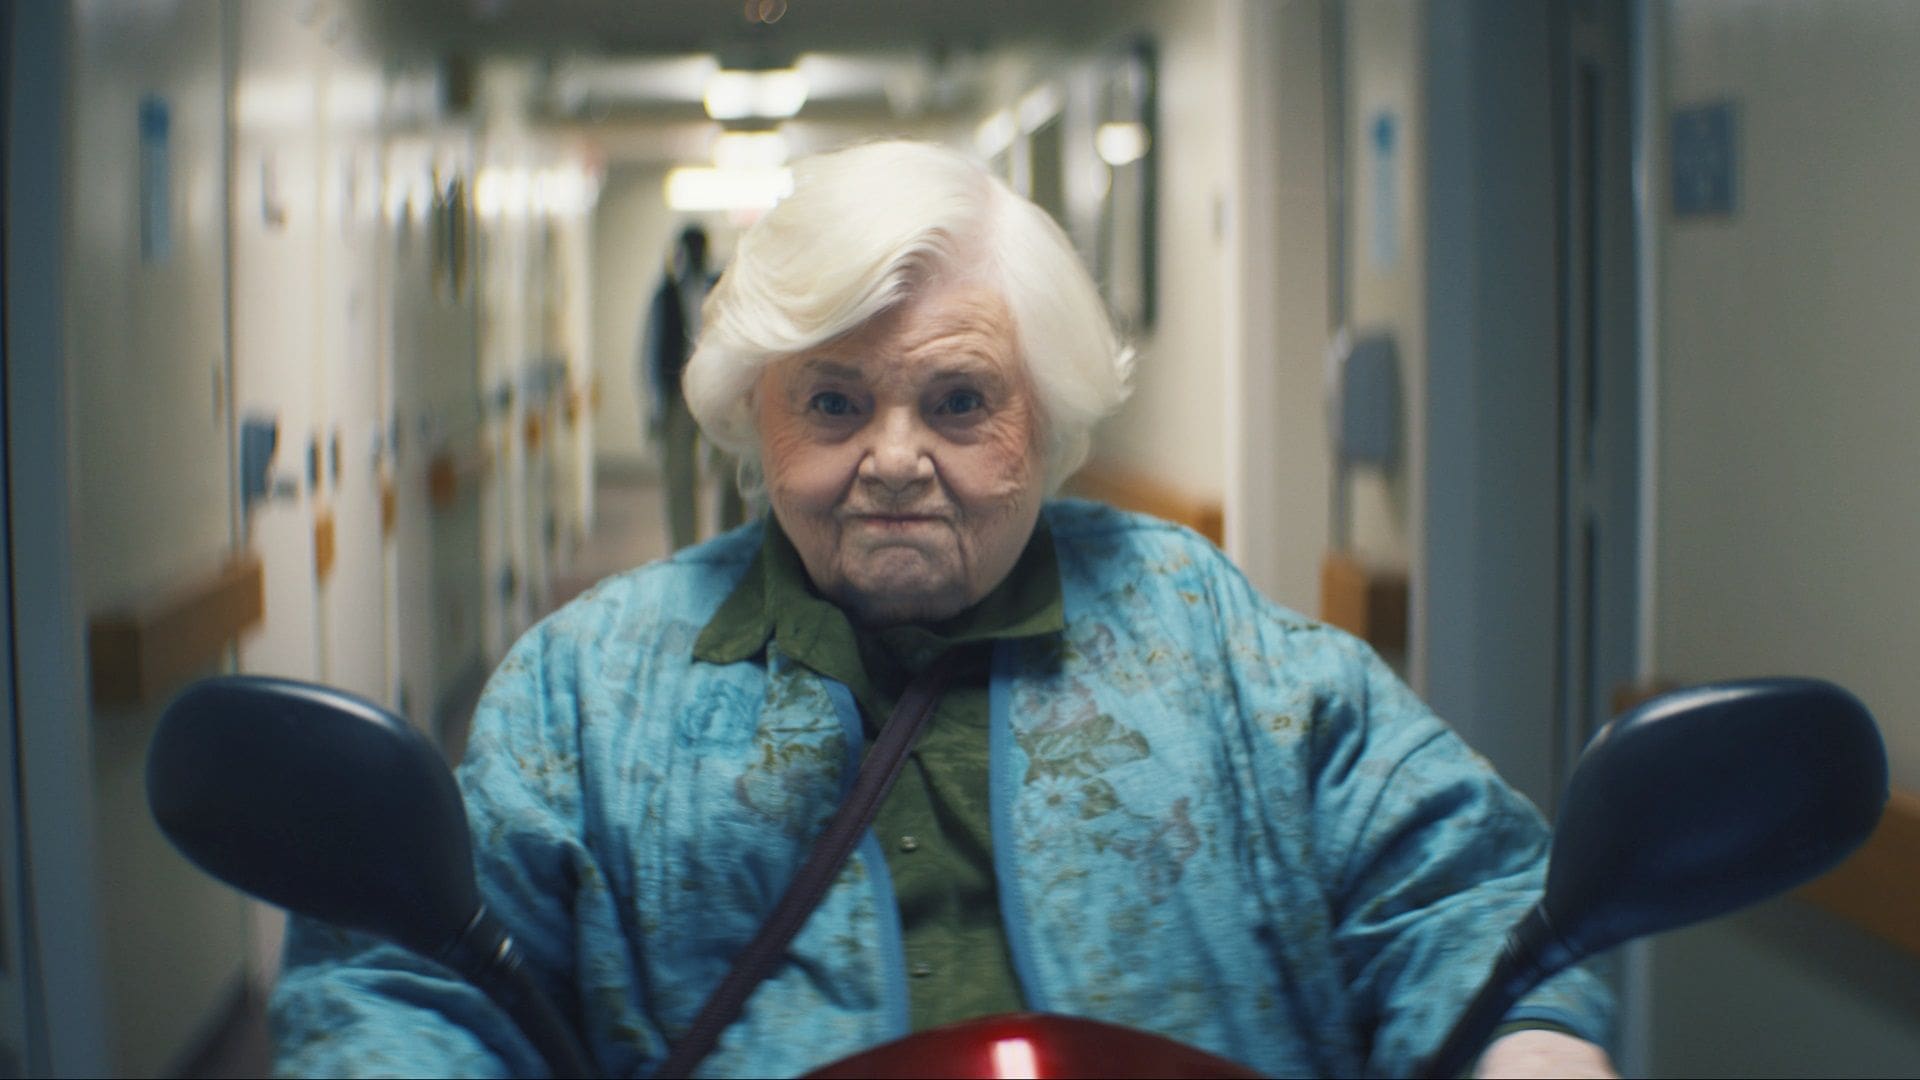 June Squibb Shines in First Lead Role at 94 in Thelma